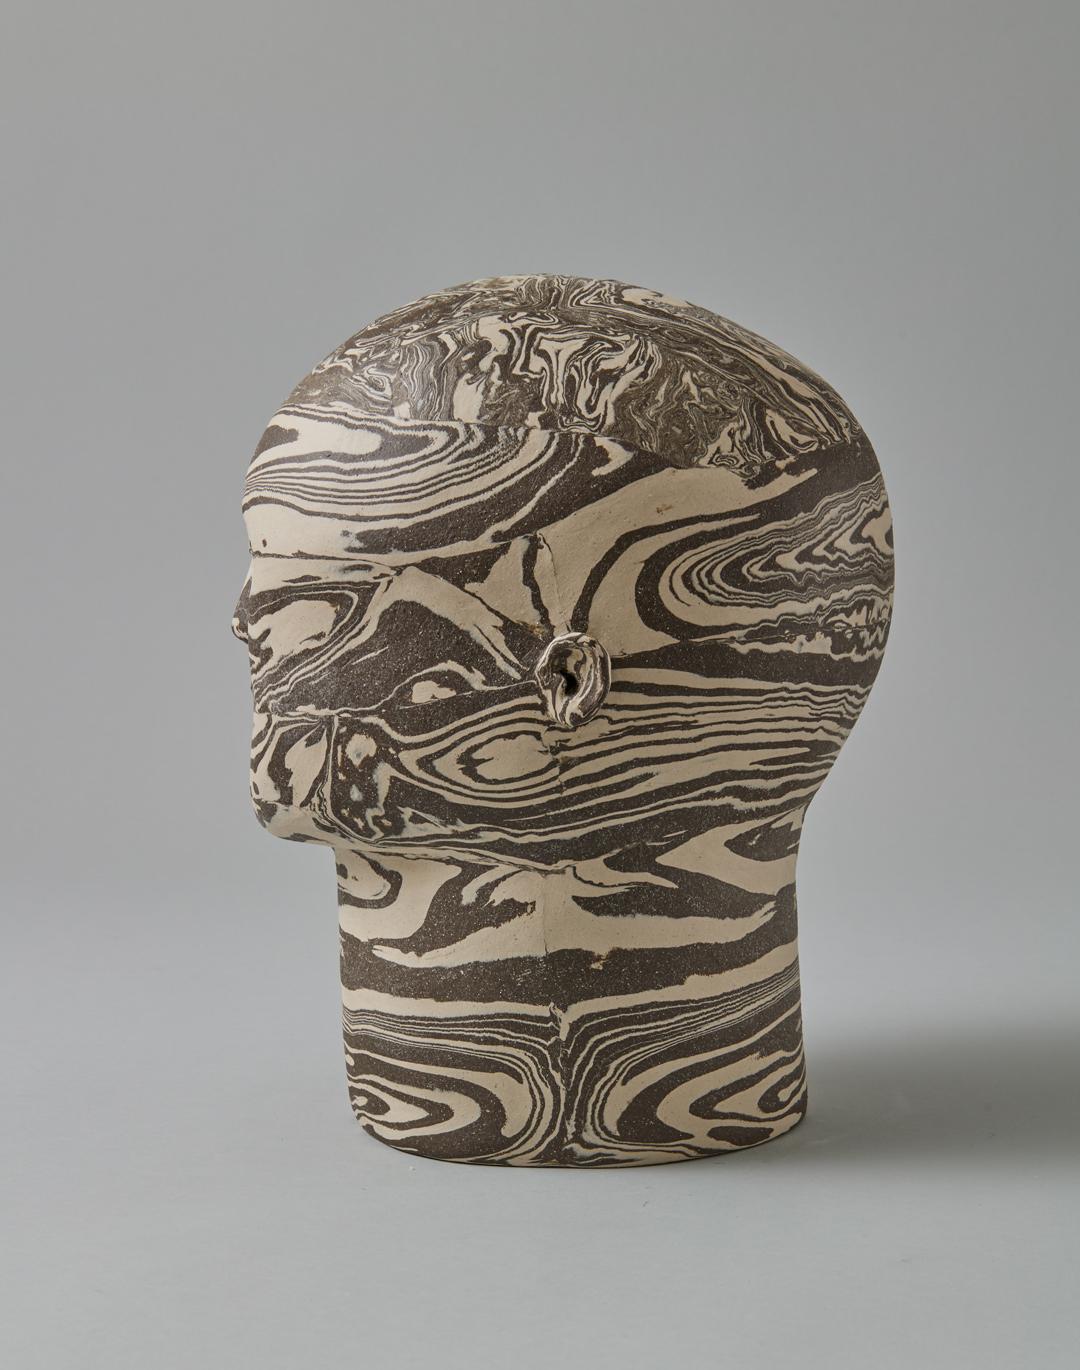 Maybe She's Not a Straight On Type of Gal, Marbled Ceramic Head, 21st Century - Sculpture by Kristen Newell